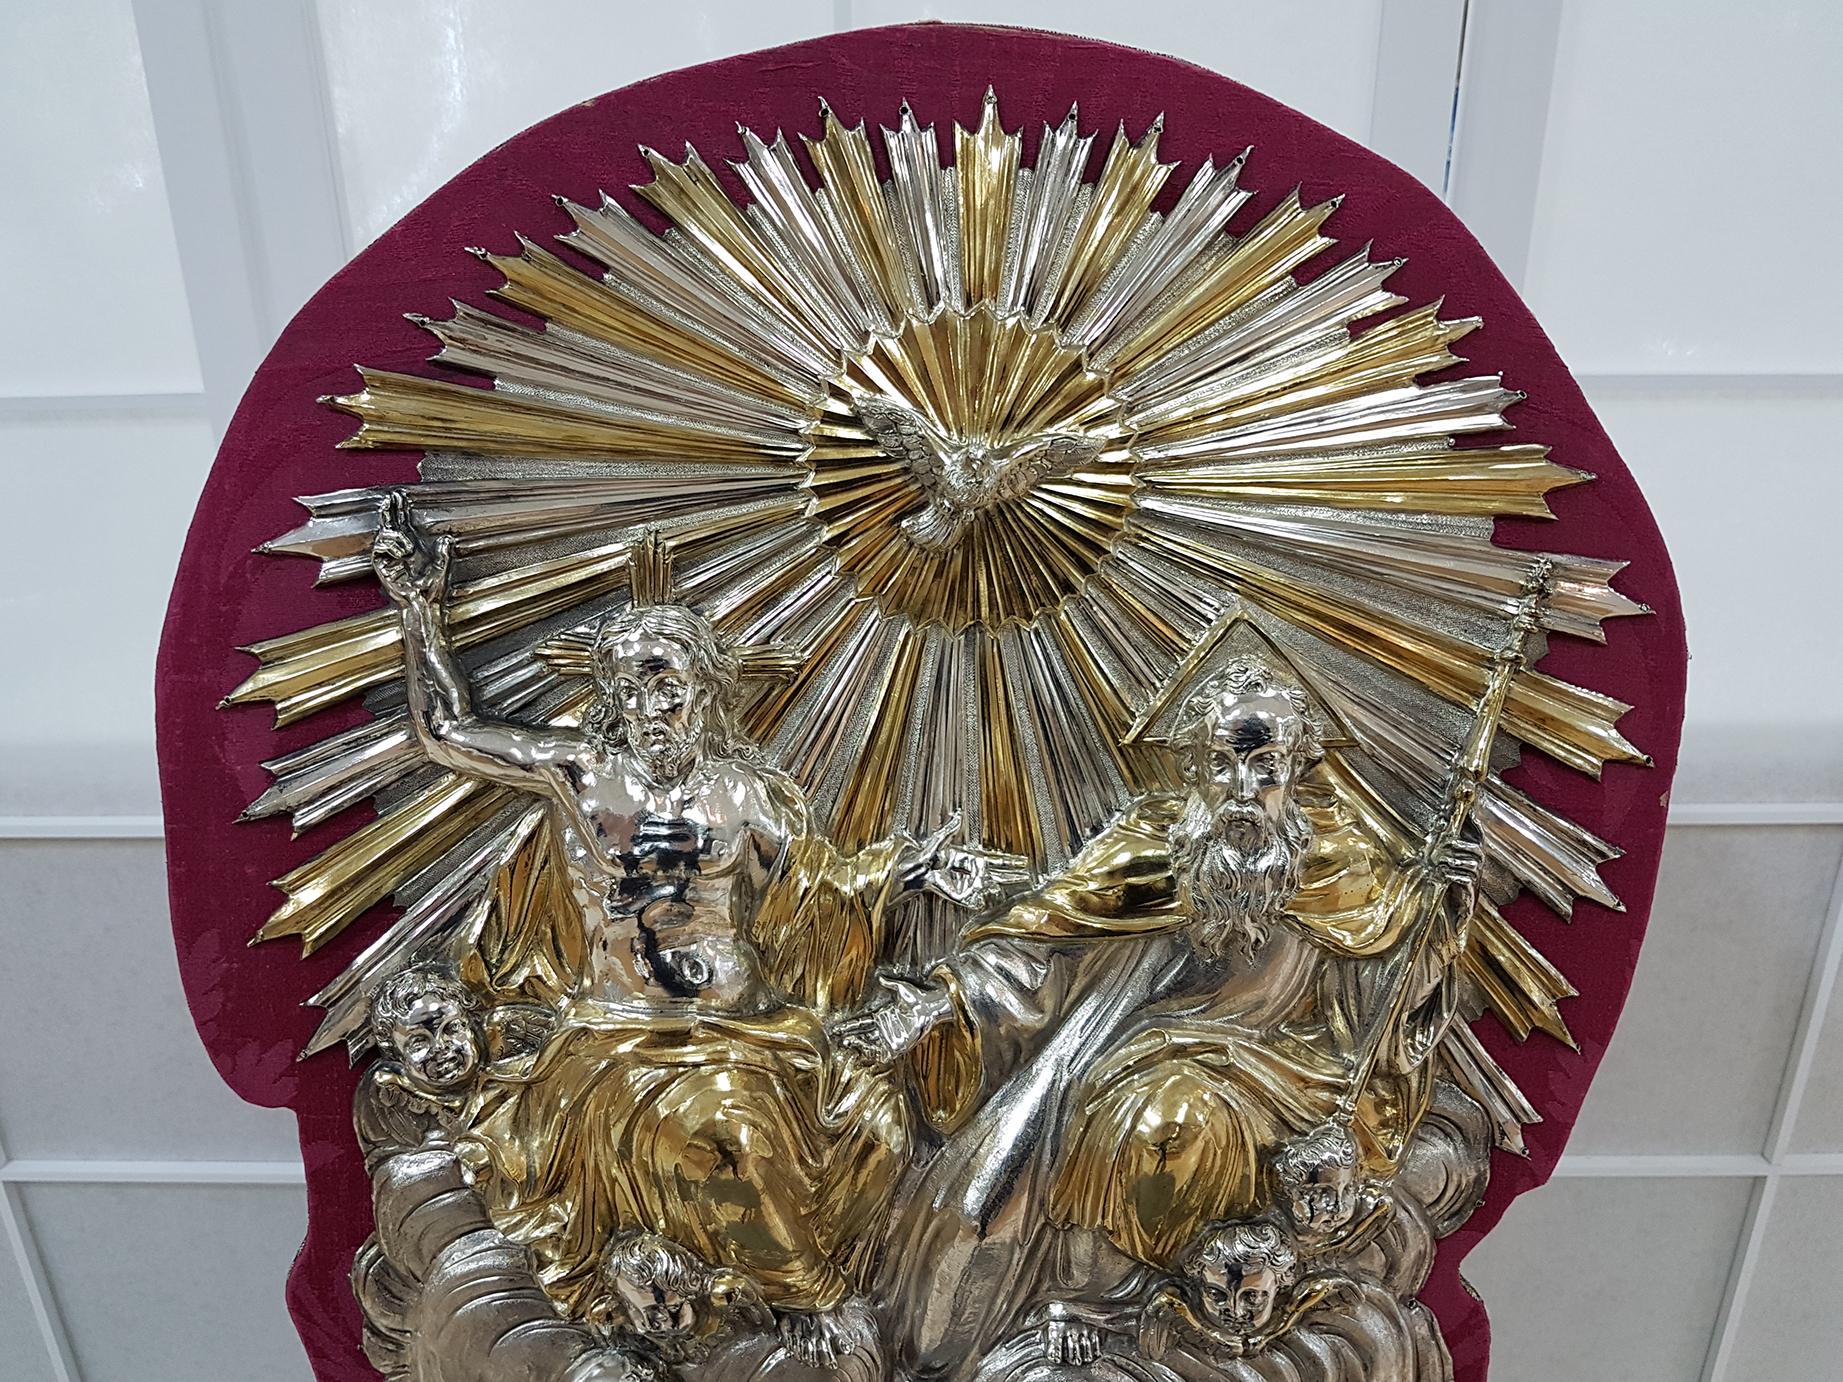 Very rare 18th century Italian silver plaque with golden details representing the Holy Trinity with St. Anthony of Padua contemplating.
The quality of the execution is very high, embossed and finely chiselled, without the addition of fusion